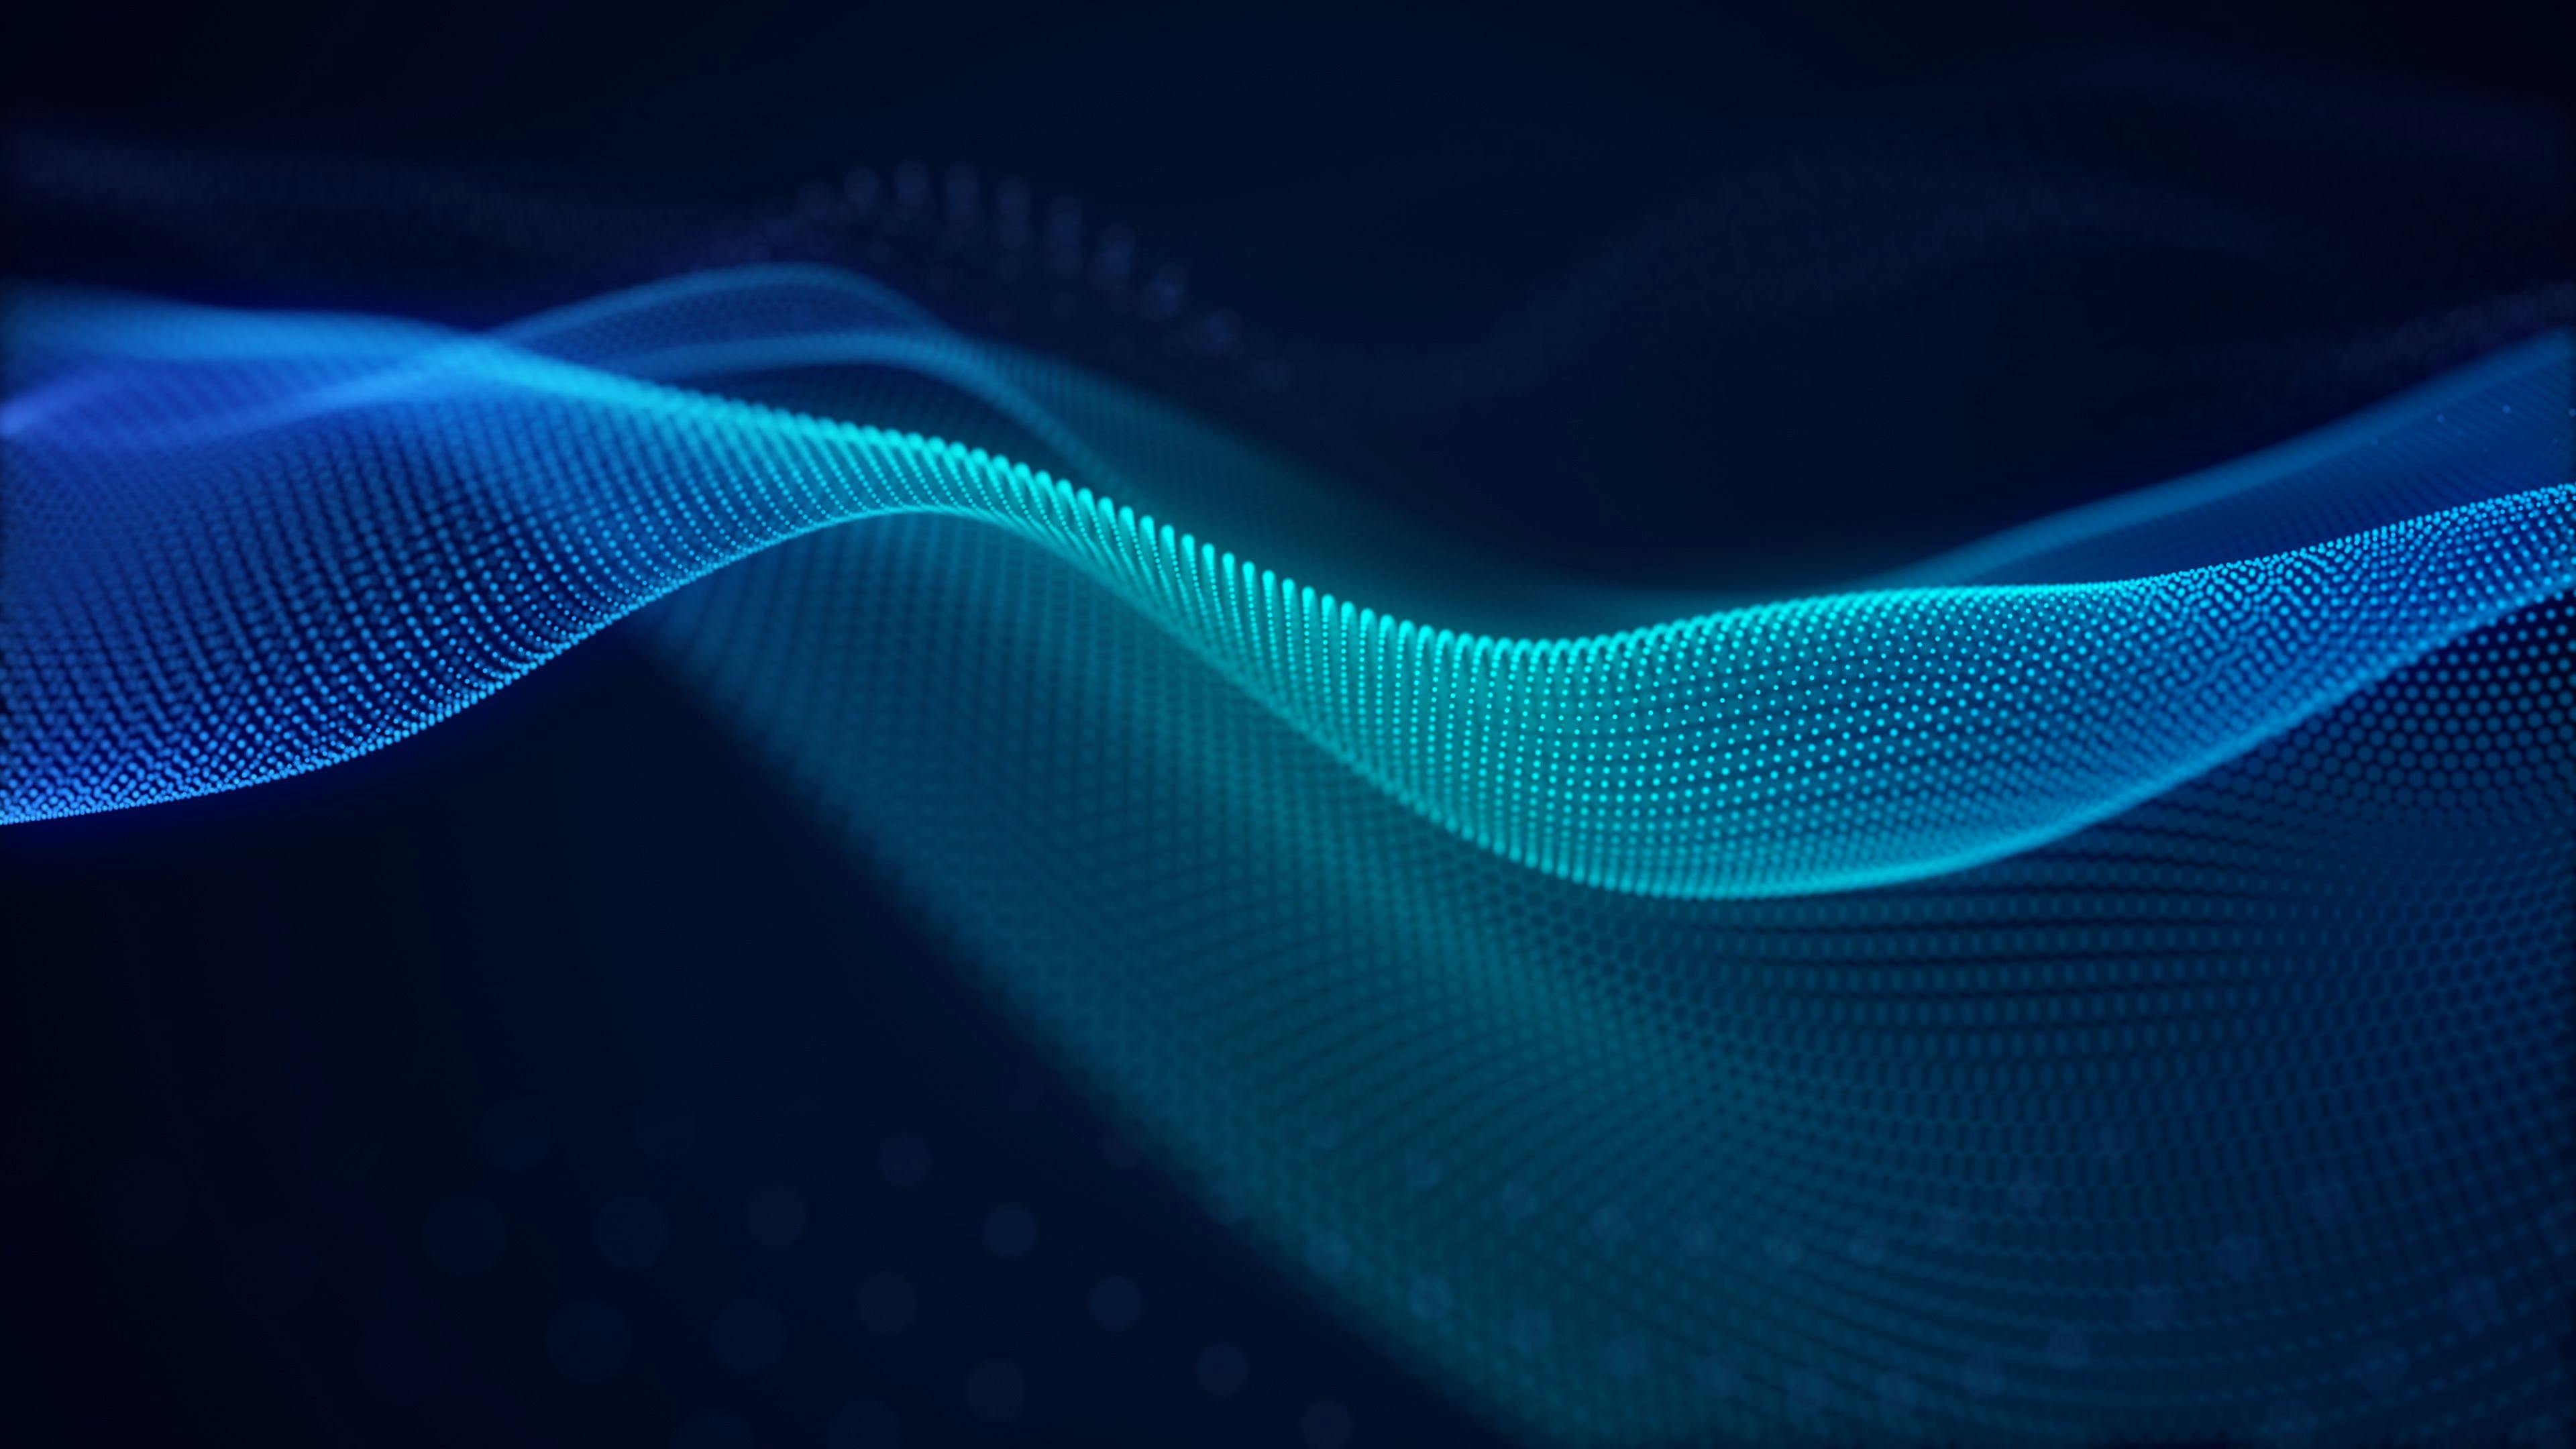 beautiful abstract wave technology background with blue light digital effect corporate concept | Image Credit: © watchara tongnoi - stock.adobe.com 